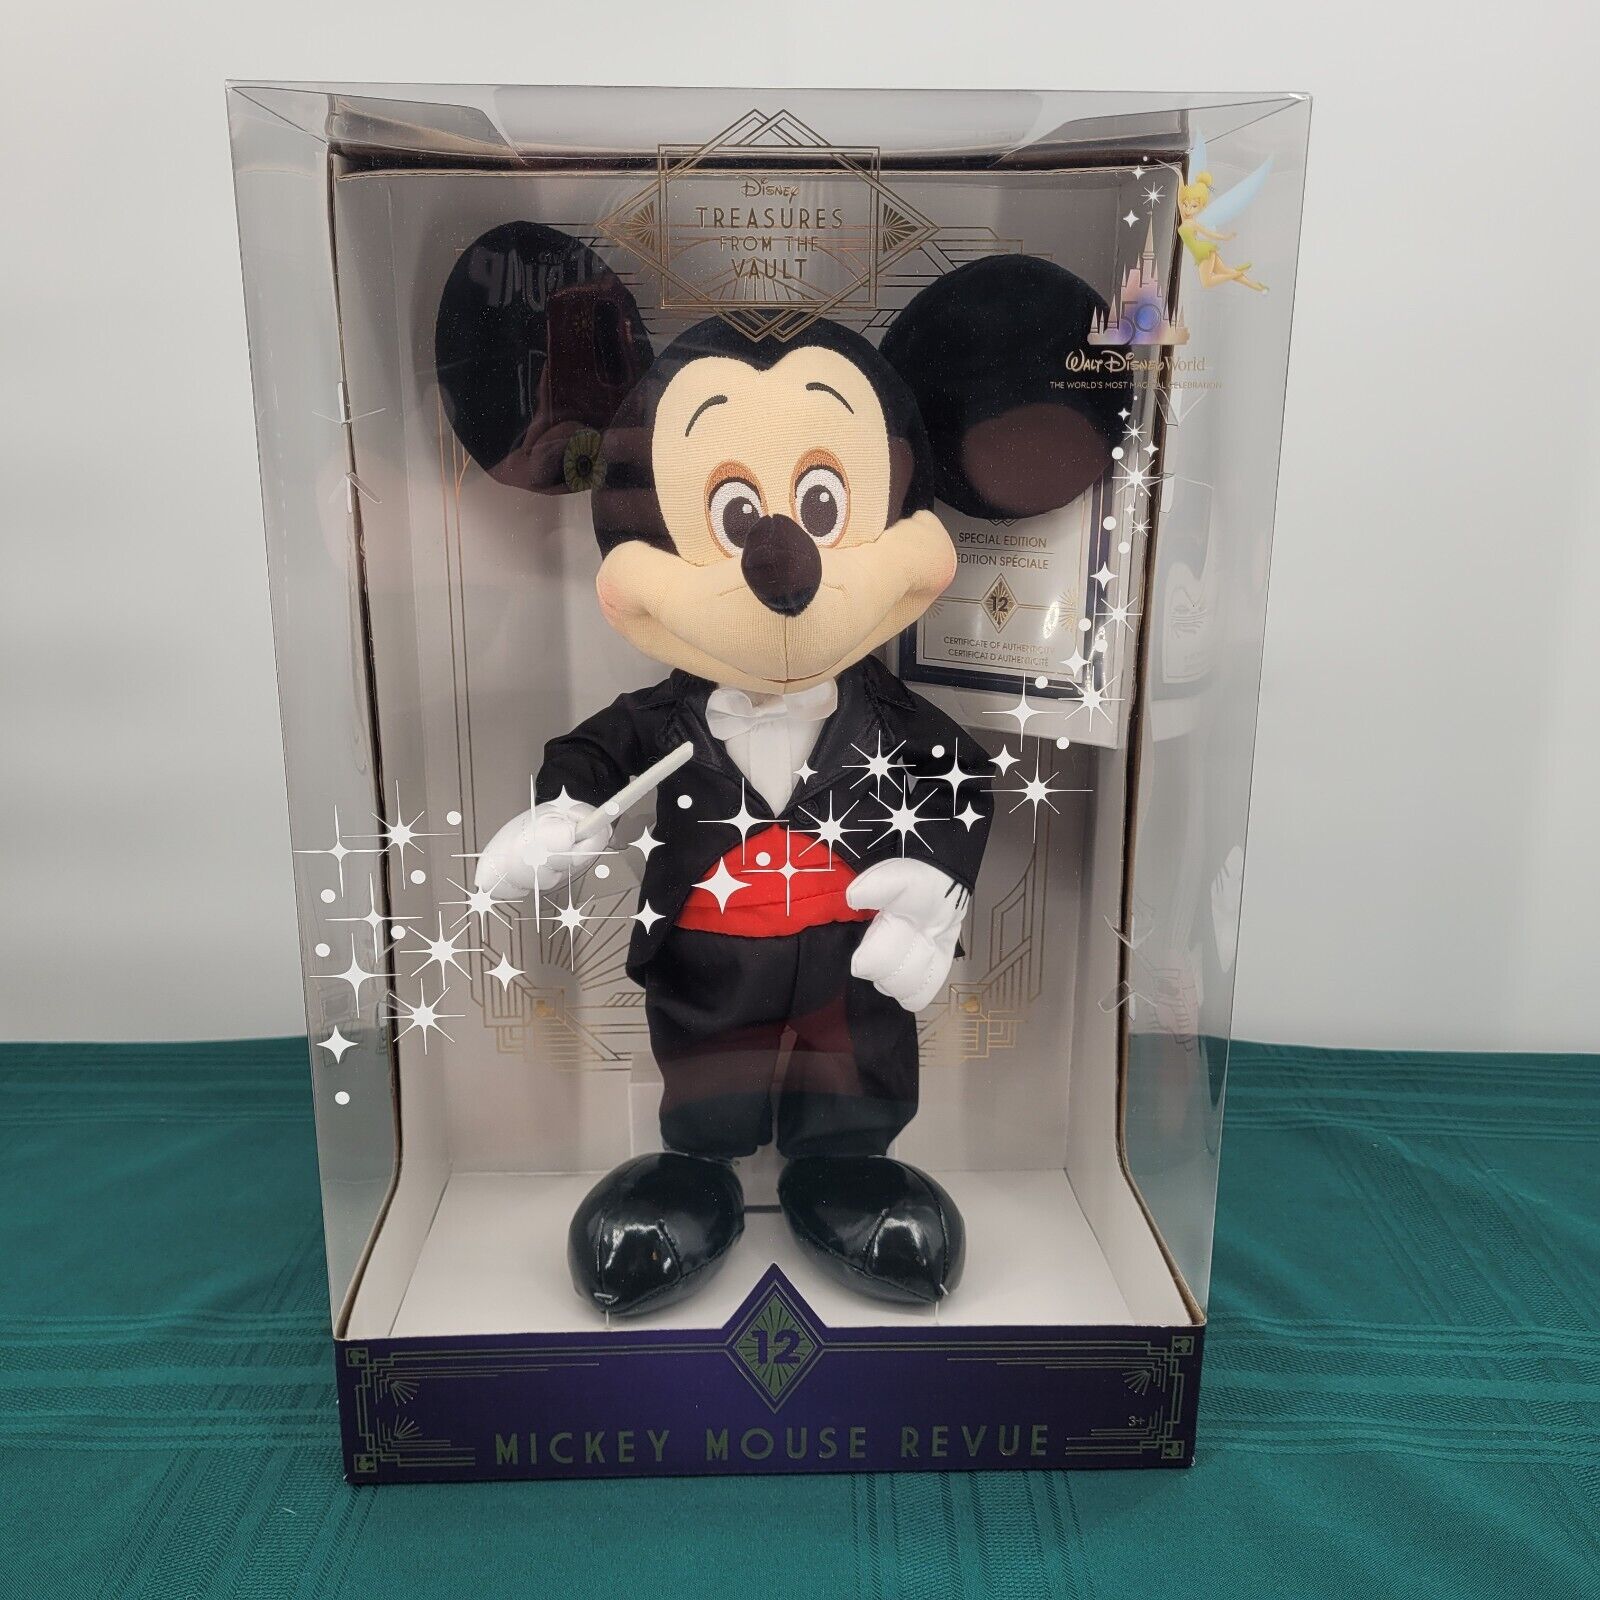 Disney Treasures From the Vault Limited Edition Mickey Mouse Revue Plush Doll